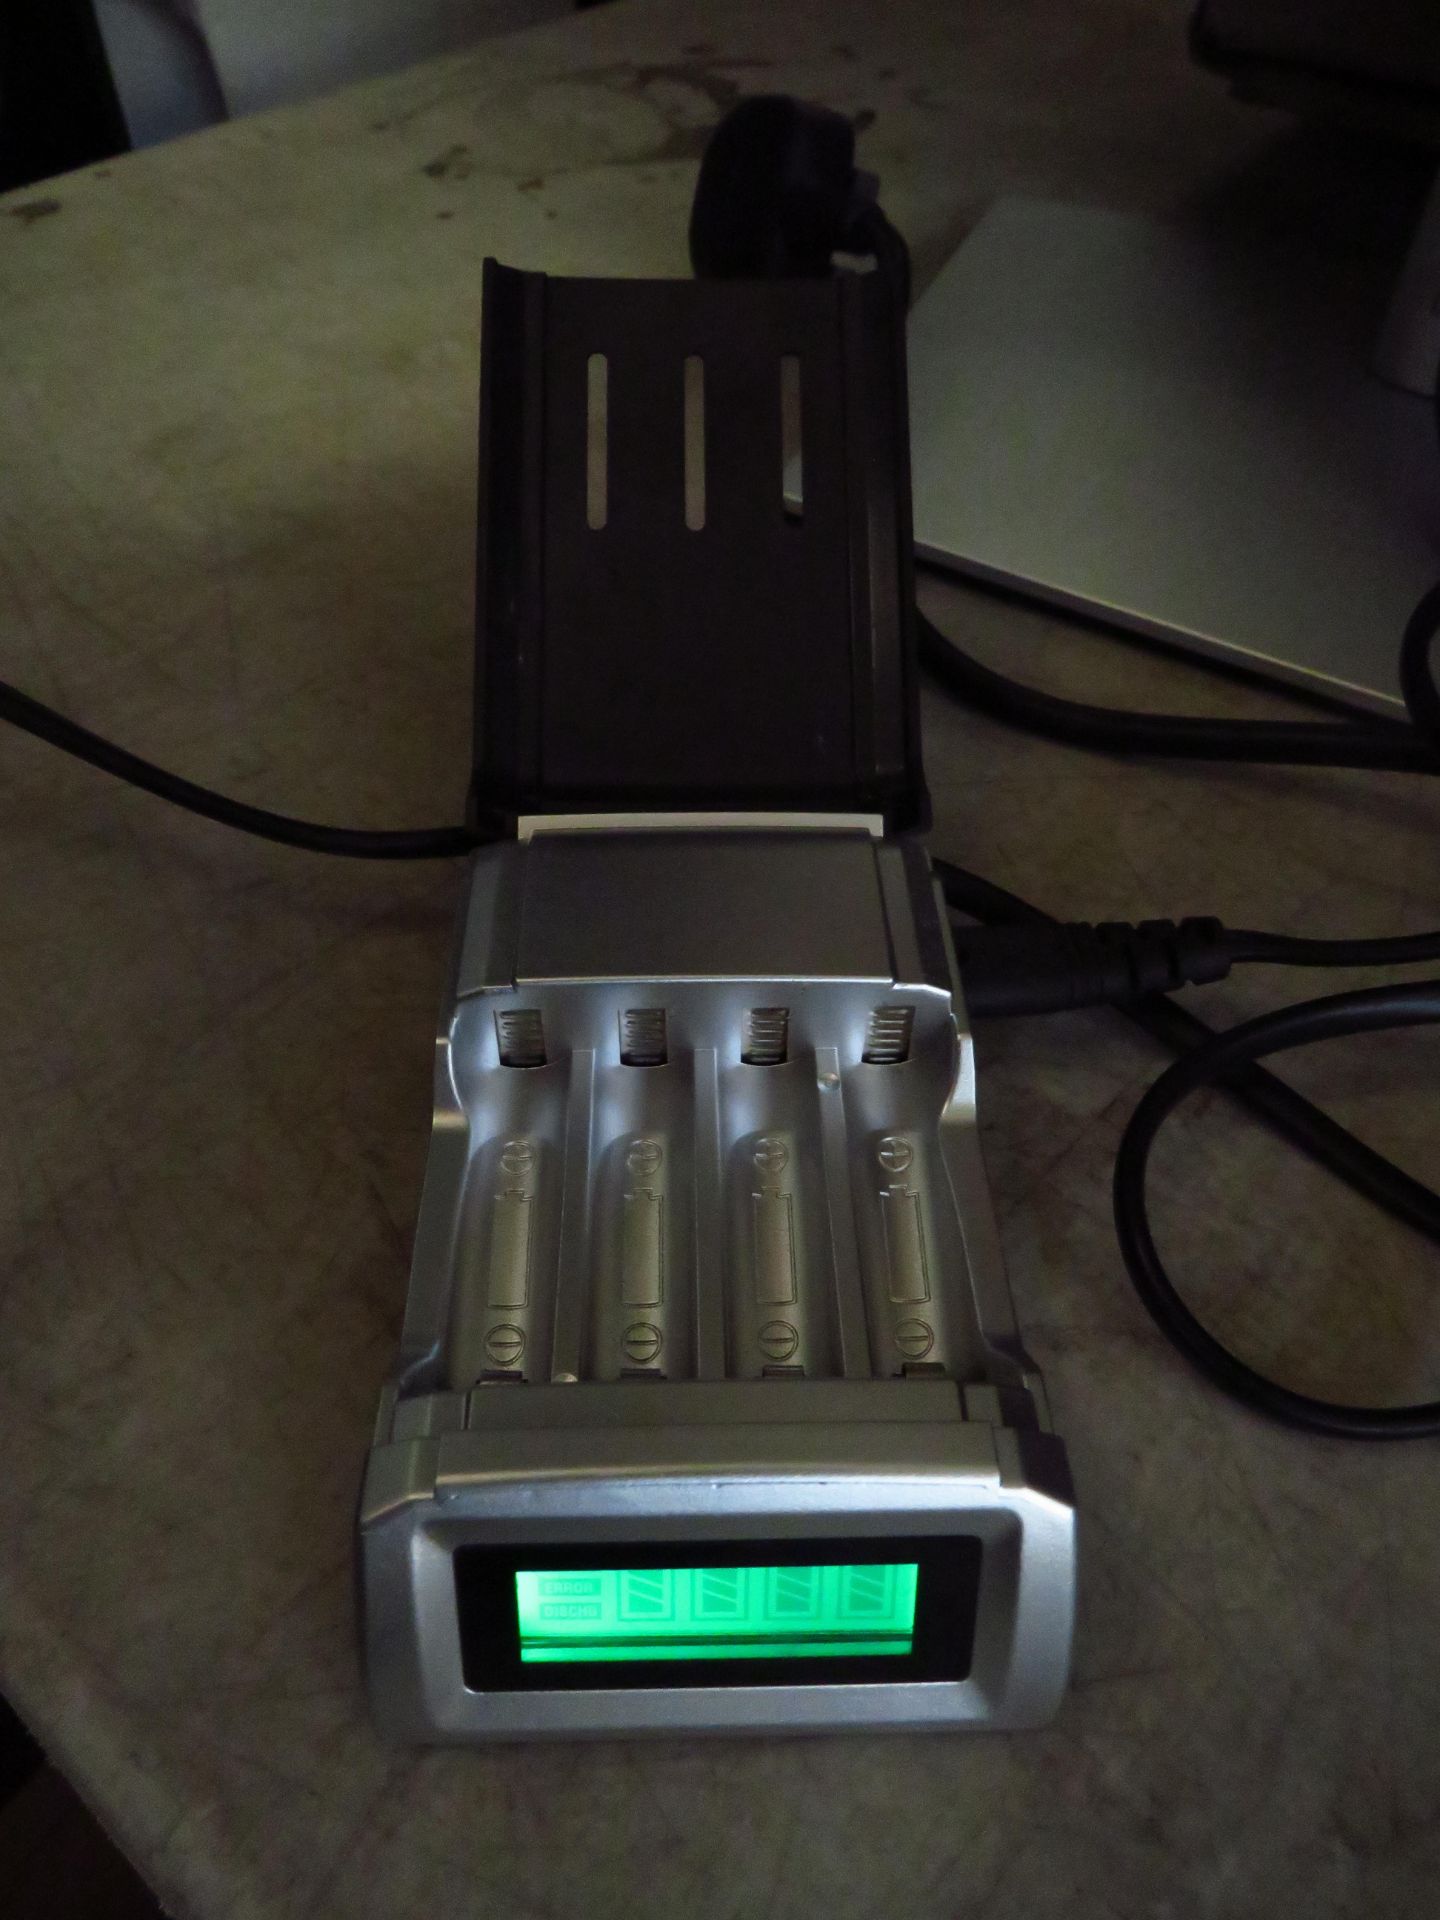 Digital Battery charger for both AAA and AA batteries the ideal Xmas money saver